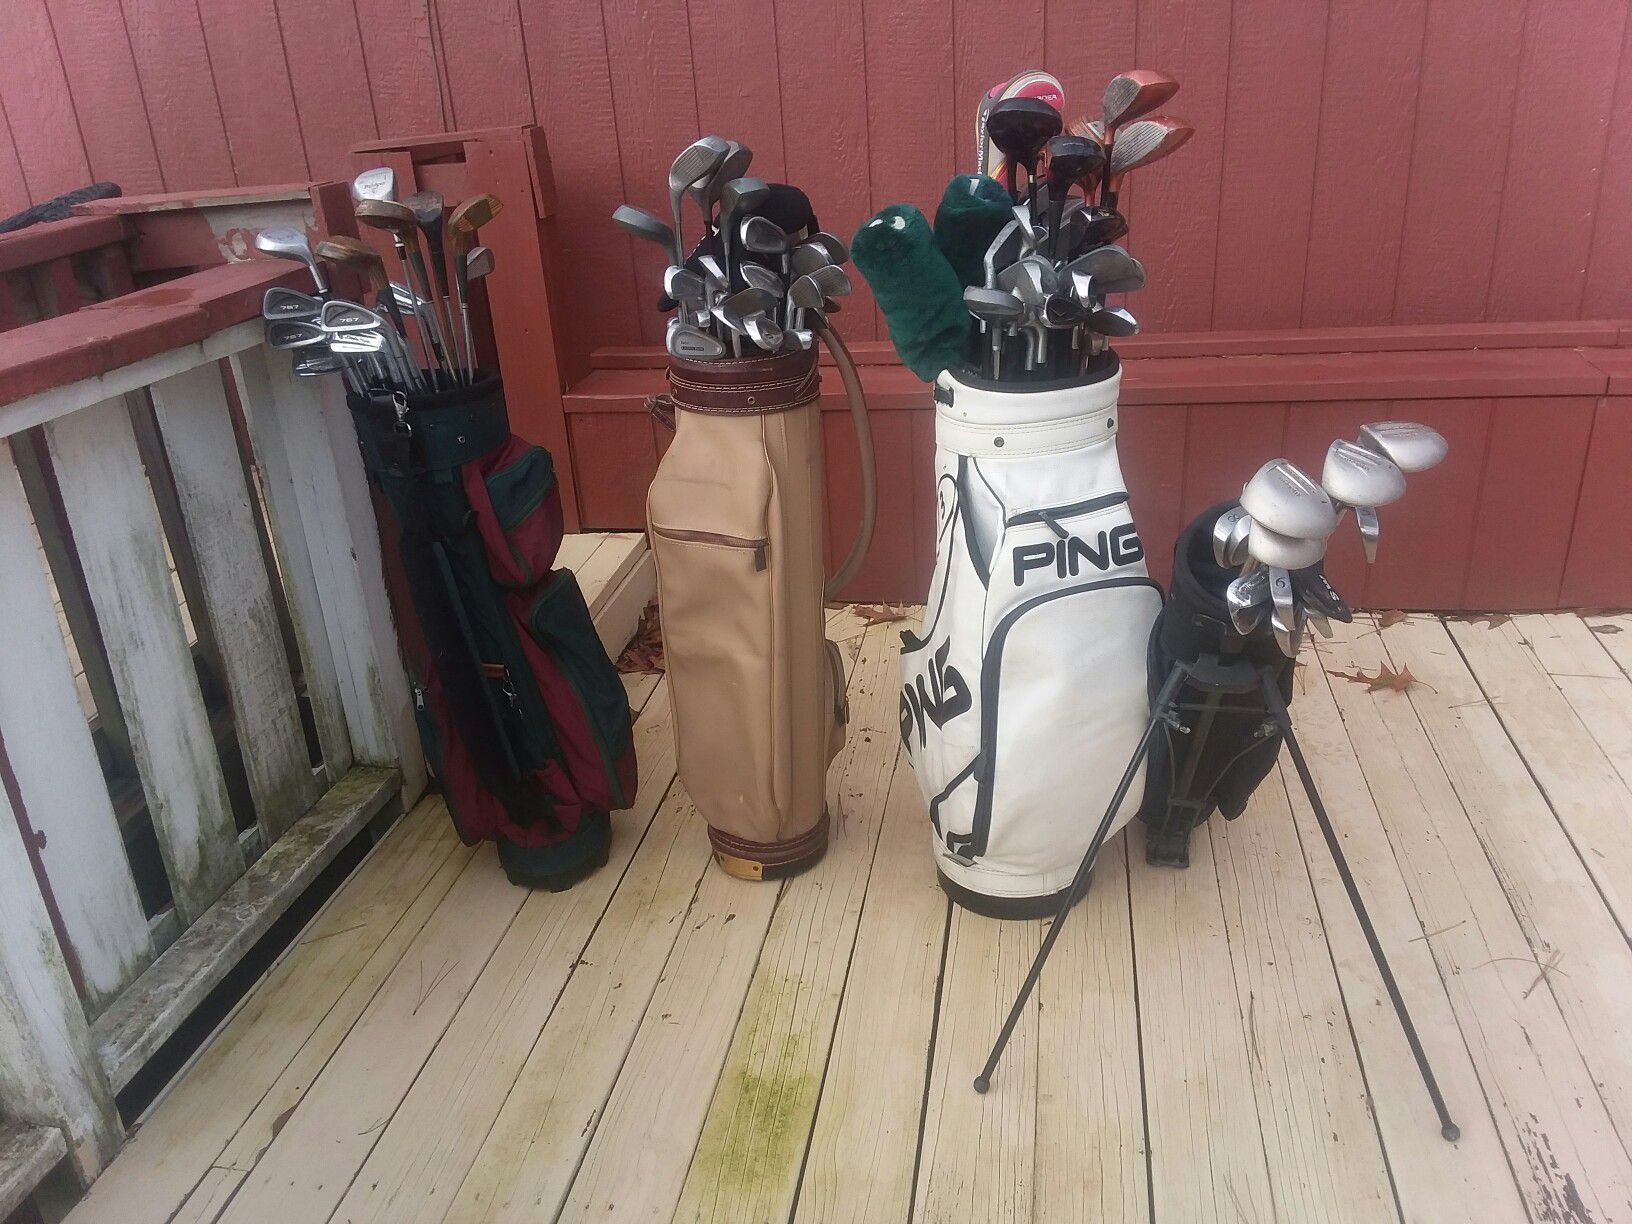 Lots of golf clubs buy some or buy them all!!